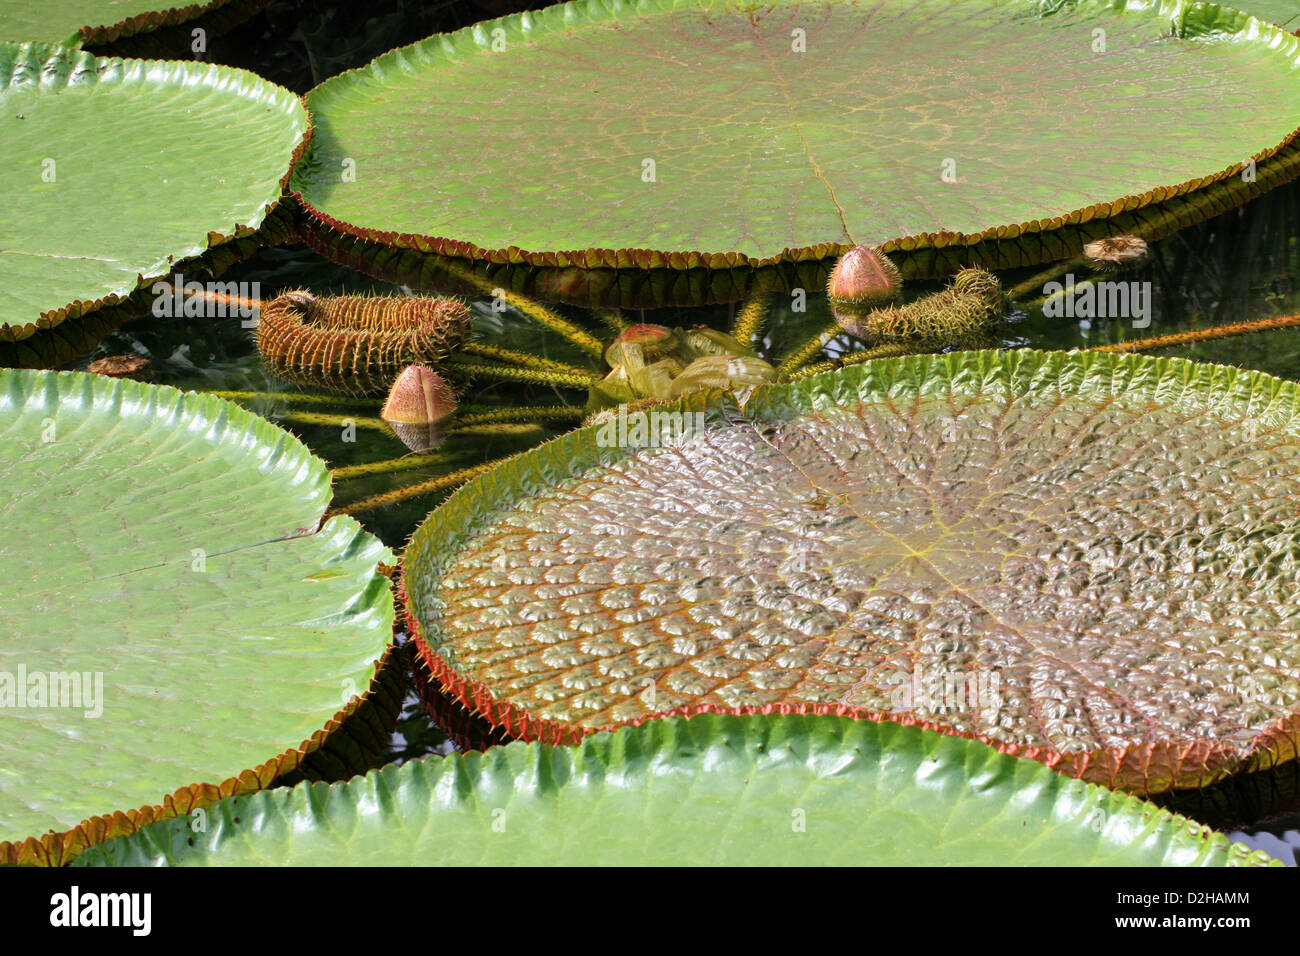 Victoria Giant Lily Pads, Victoria amazonica, Nymphaeaceae. Amazon River Basin. Stock Photo